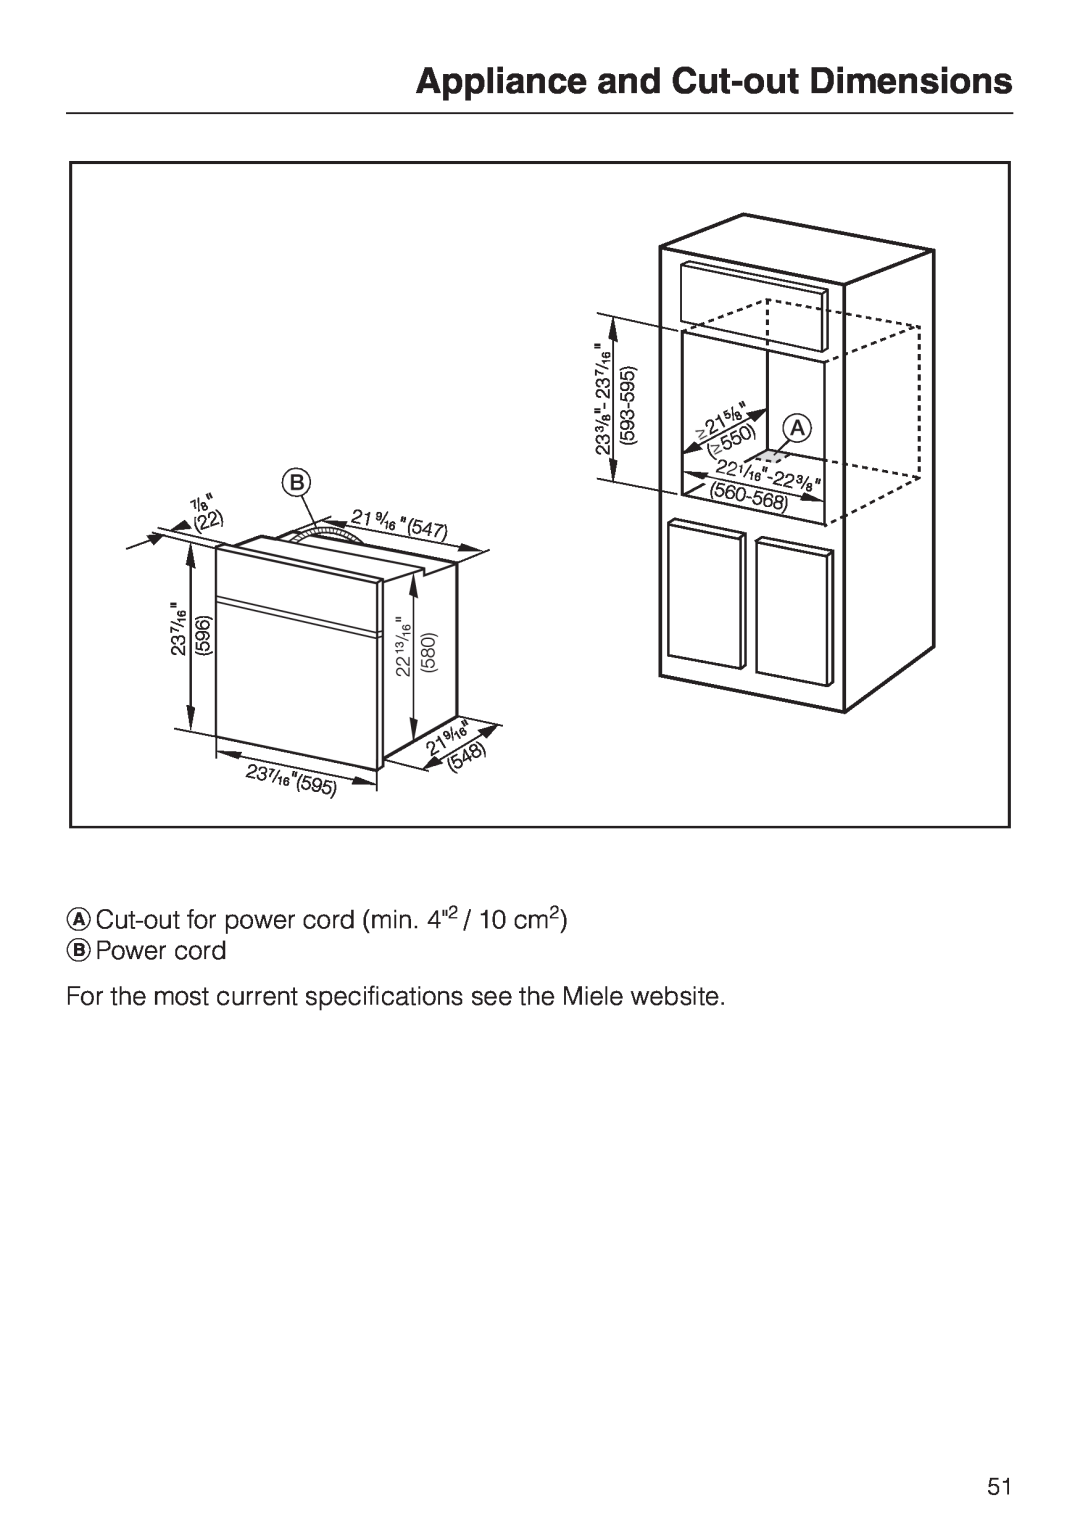 Miele H 4242 B installation instructions Appliance and Cut-outDimensions, Cut-outfor power cord min. 42 / 10 cm2 Power cord 